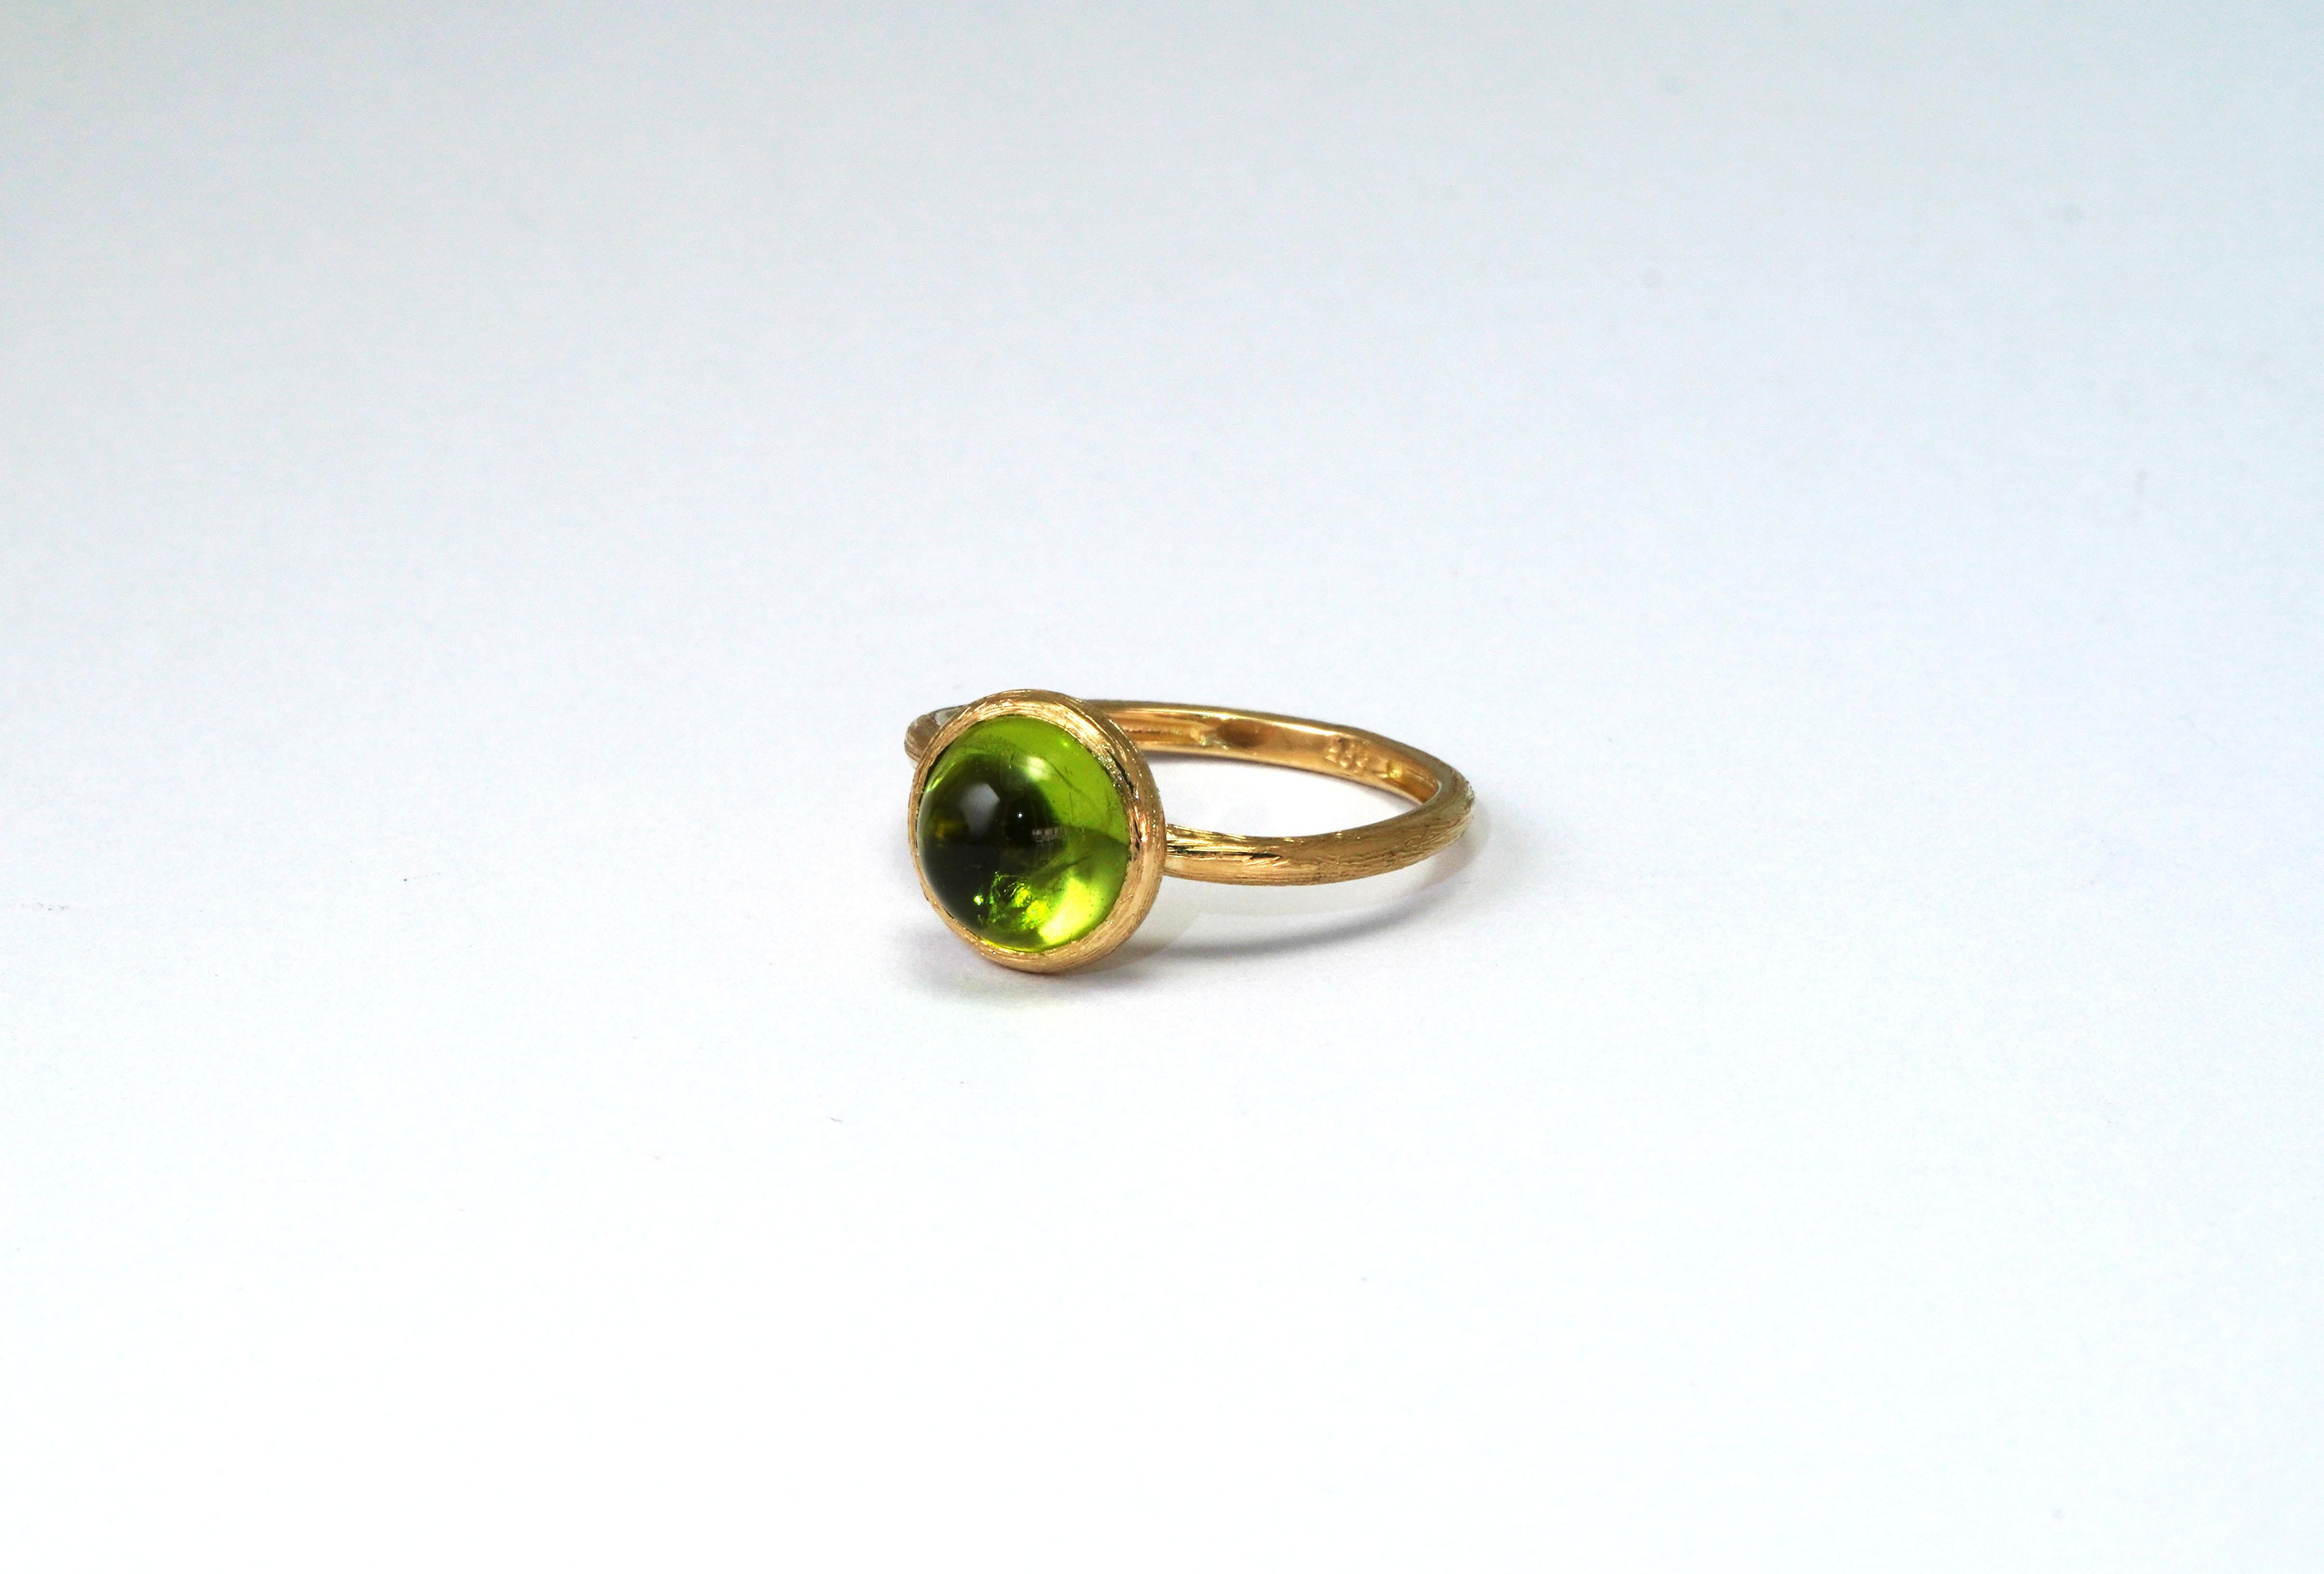 14 kt Yellow Gold ring with Peridot
Gold color: Yellow
Ring size: 6 3/4 US
Total weight: 2.85 grams

Set with:
- Peridot
Cut: Cabochon
Color: Green